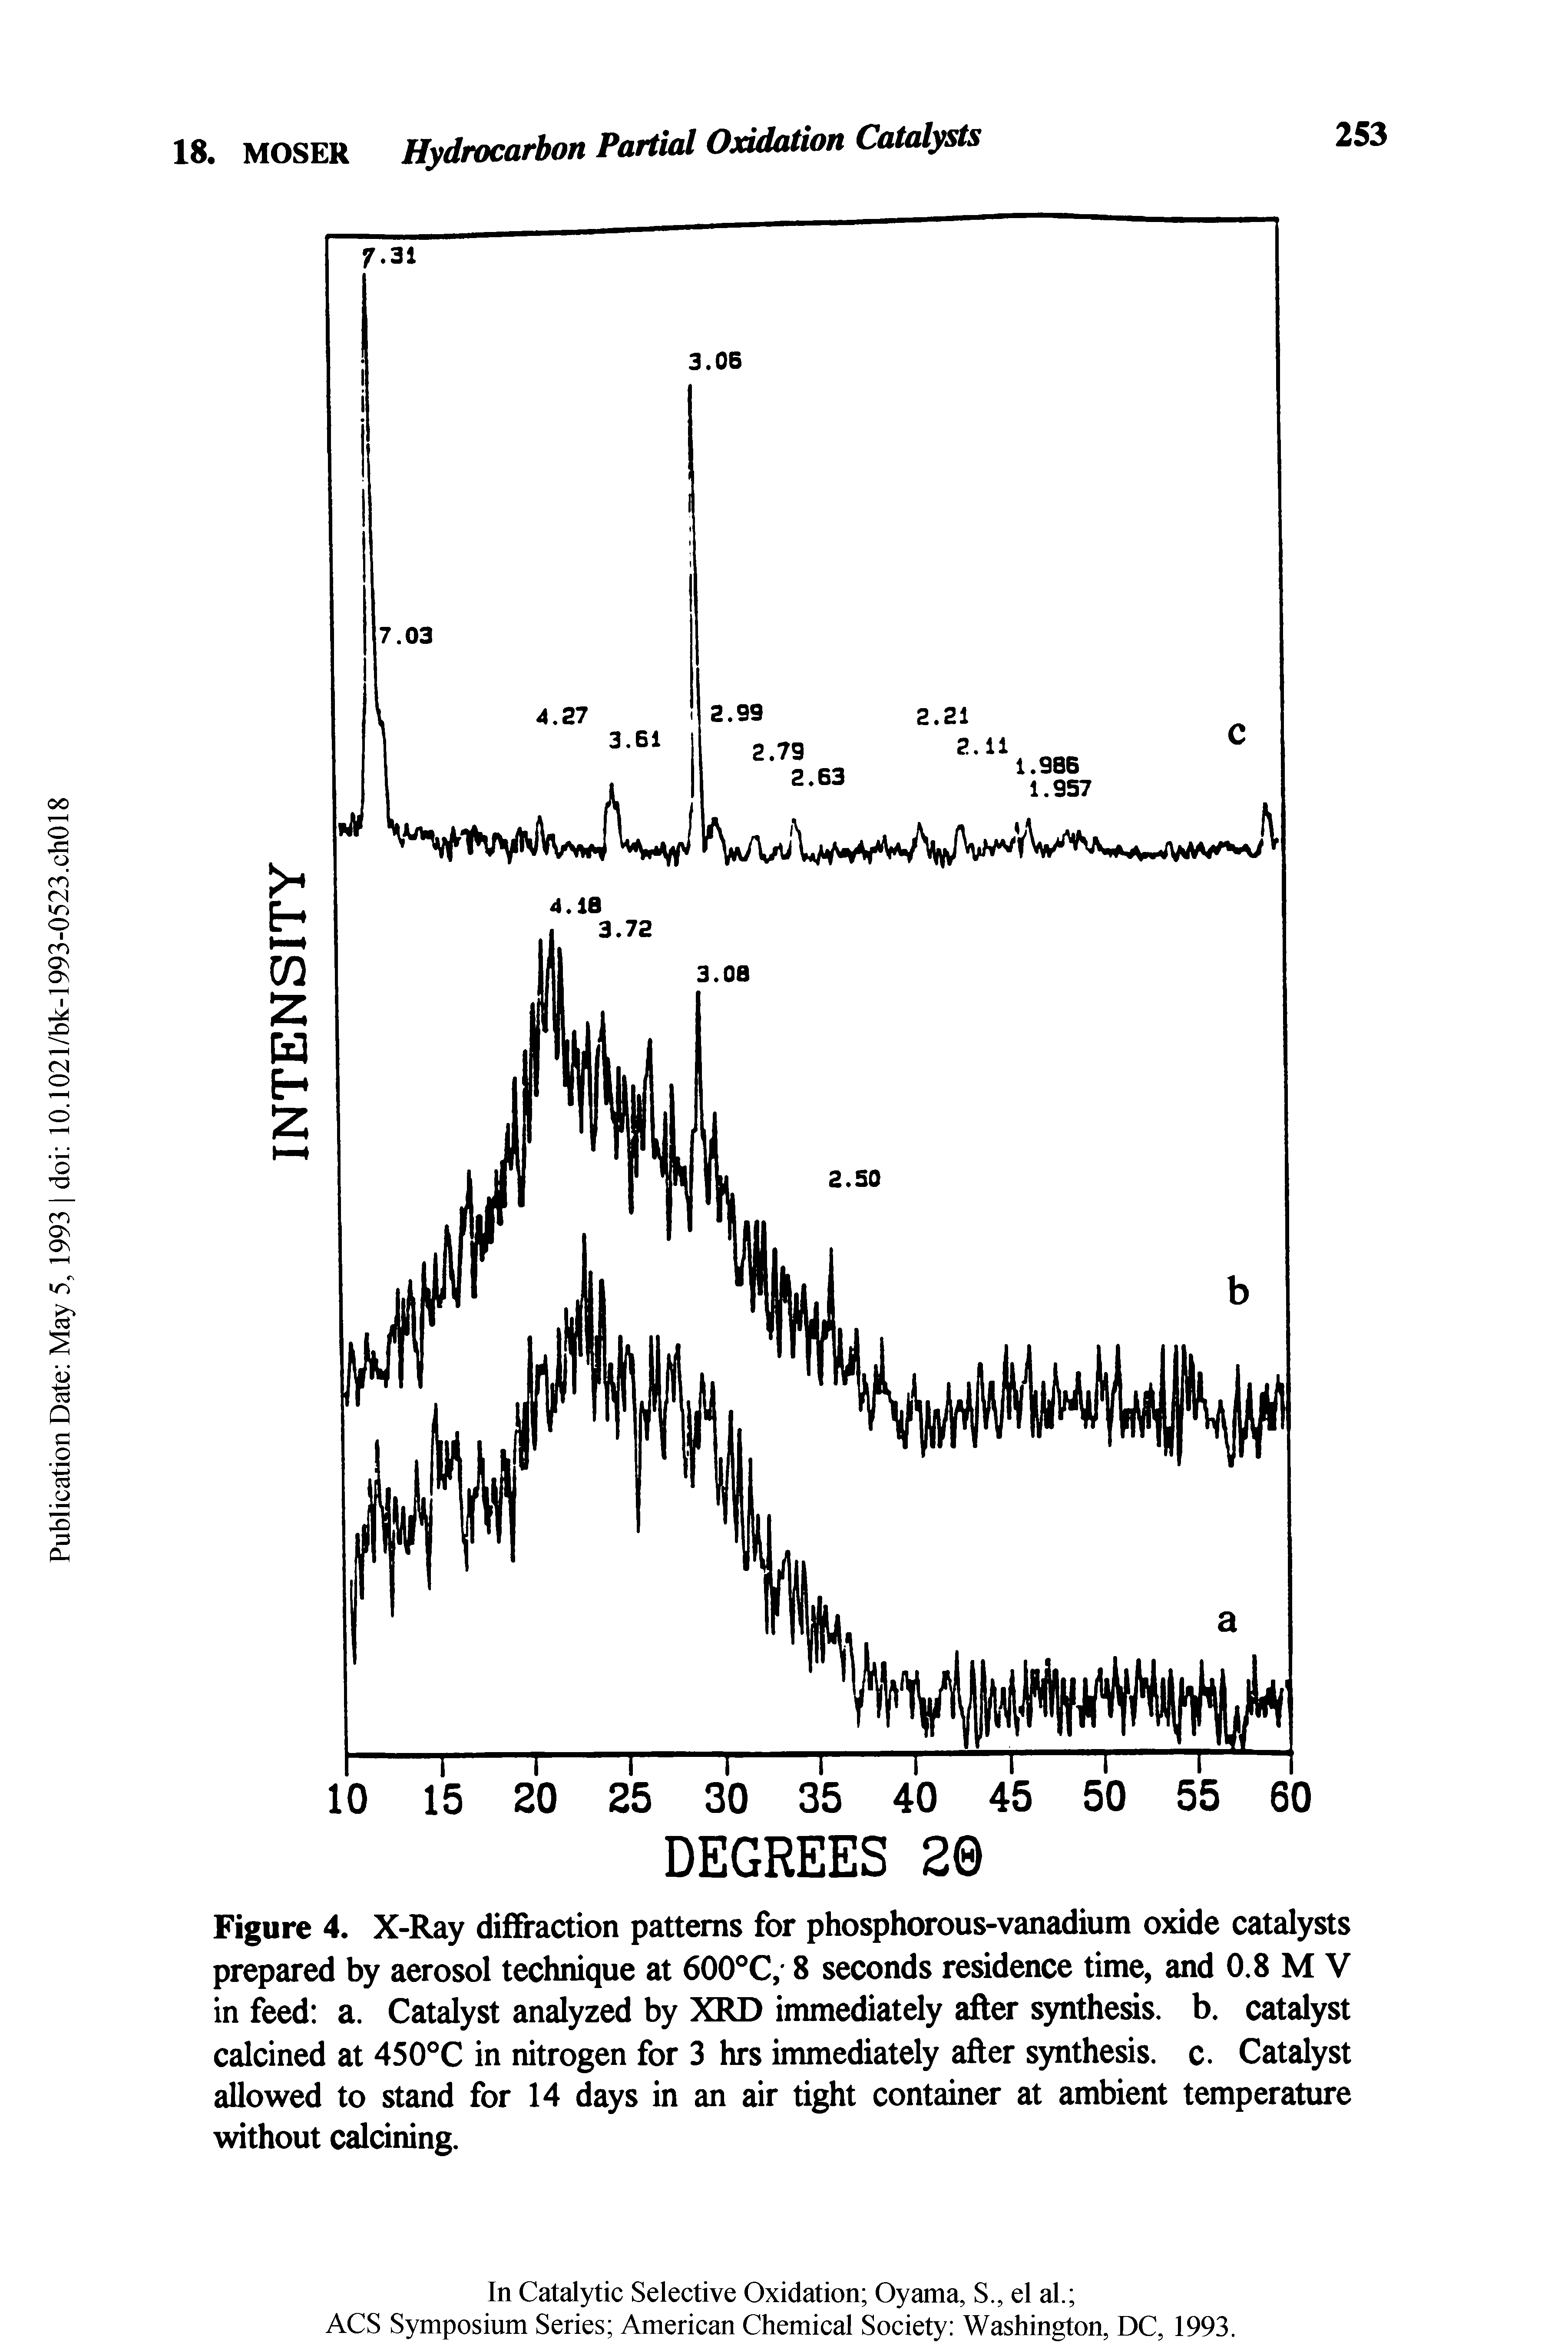 Figure 4. X-Ray diffraction patterns for phosphorous-vanadium oxide catalysts prepared by aerosol technique at 600 C, 8 seconds residence time, and 0.8 M V in feed a. Catalyst analyzed by XRD immediately after synthesis, b. catalyst calcined at 450°C in nitrogen for 3 hrs immediately after synthesis, c. Catalyst allowed to stand for 14 days in an air tight container at ambient temperature without calcining.